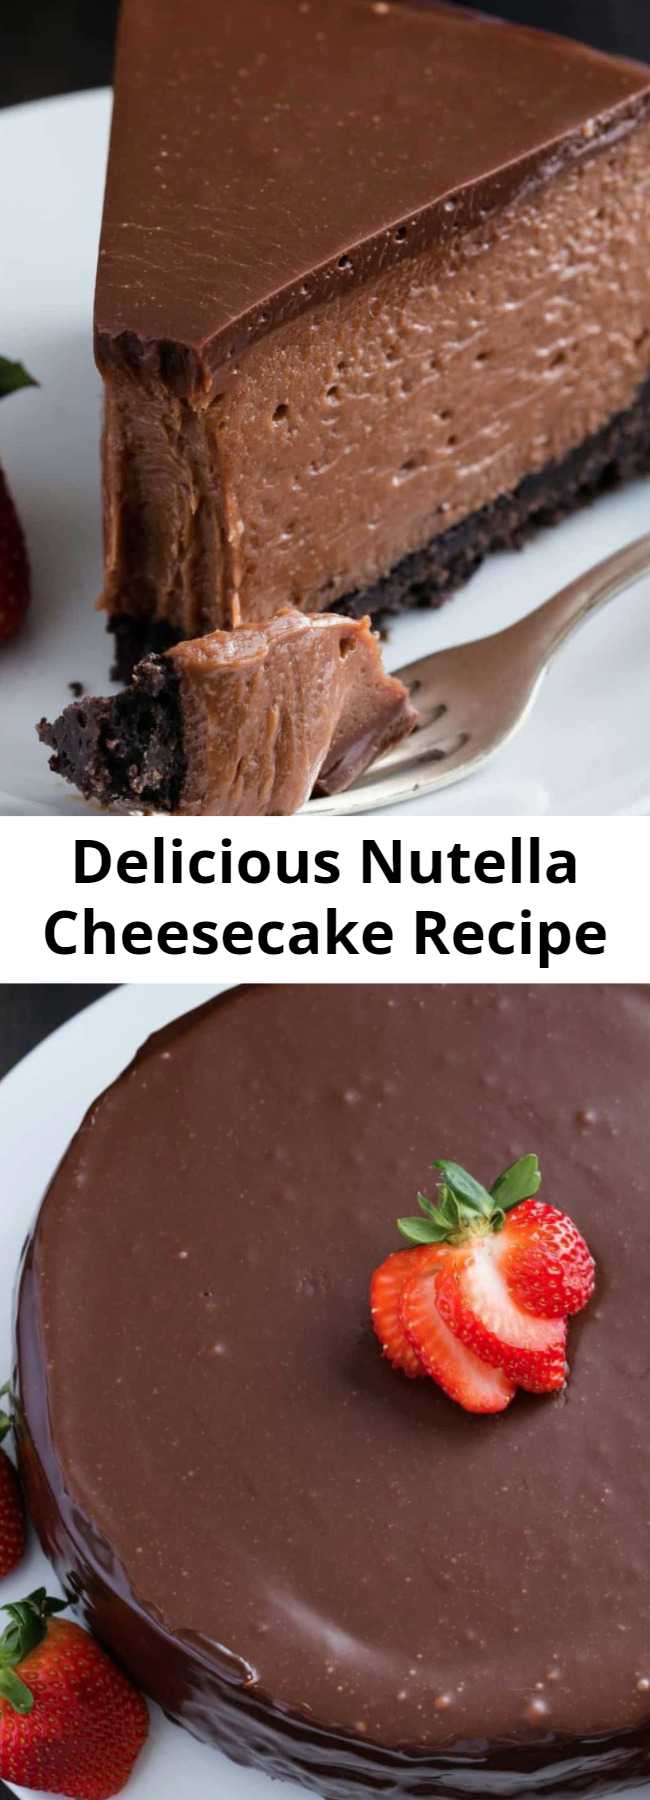 Delicious Nutella Cheesecake Recipe - This Nutella Cheesecake tastes like it came from a gourmet bakery. It’s decadent, creamy, and full of Nutella flavor. #nutella #cheesecake #oreocrust